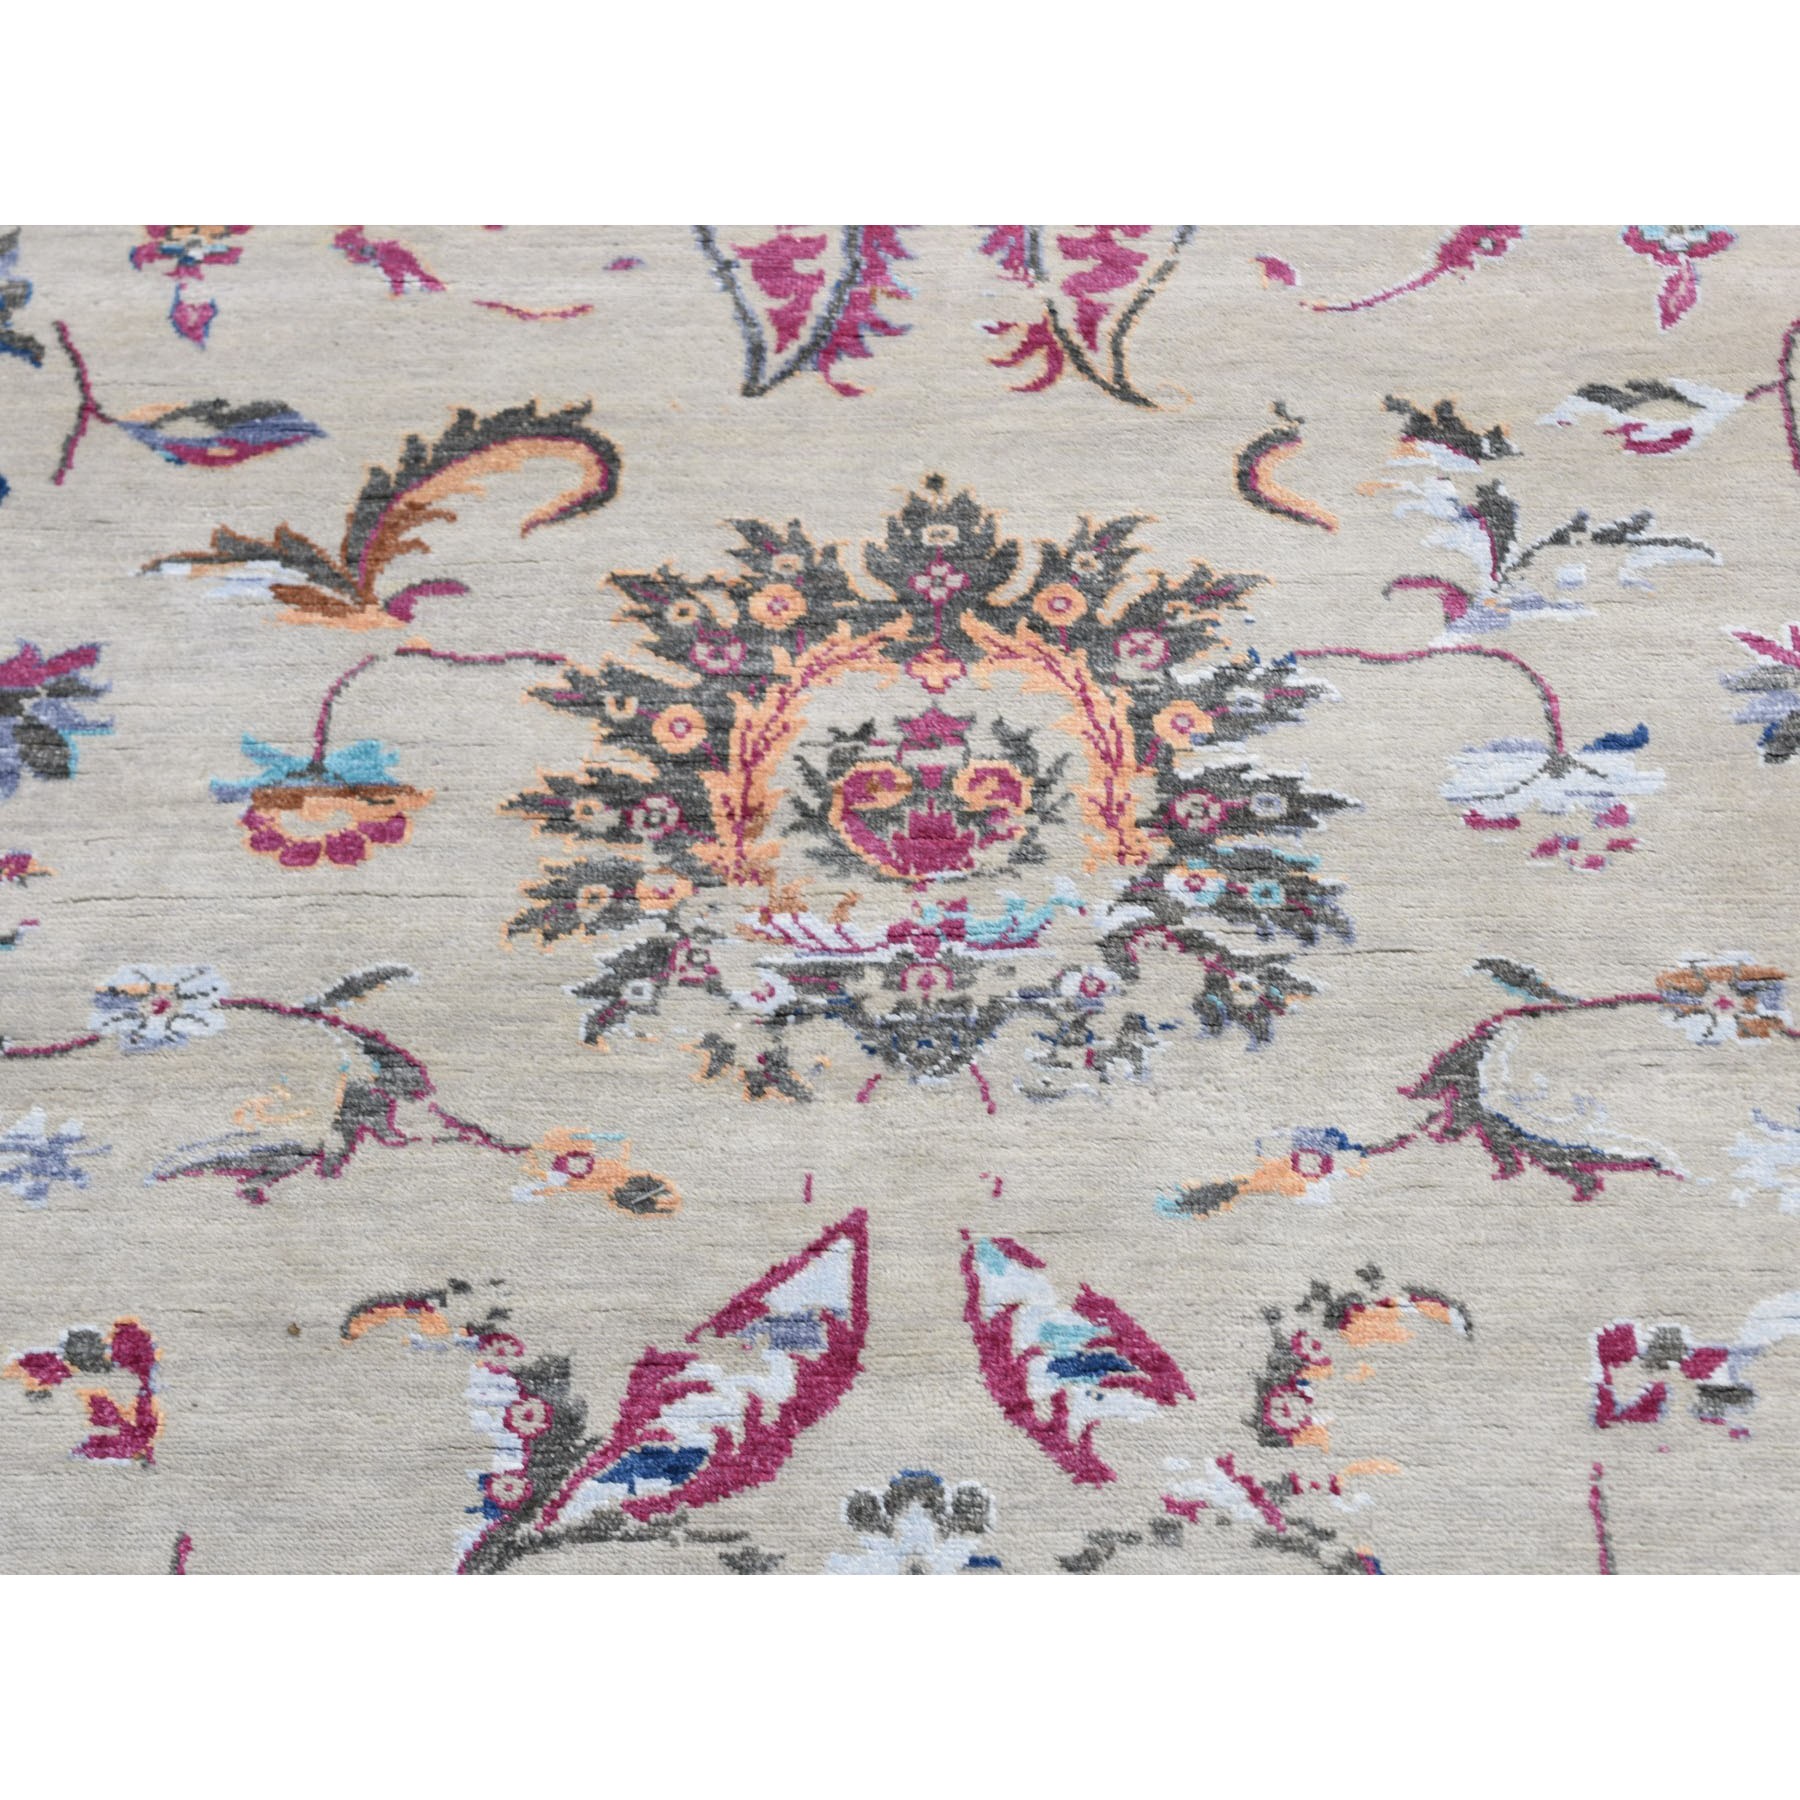 9-1 x12-1  Colorful Wool And Silk Erased Persian Design Hand Knotted Oriental Rug 